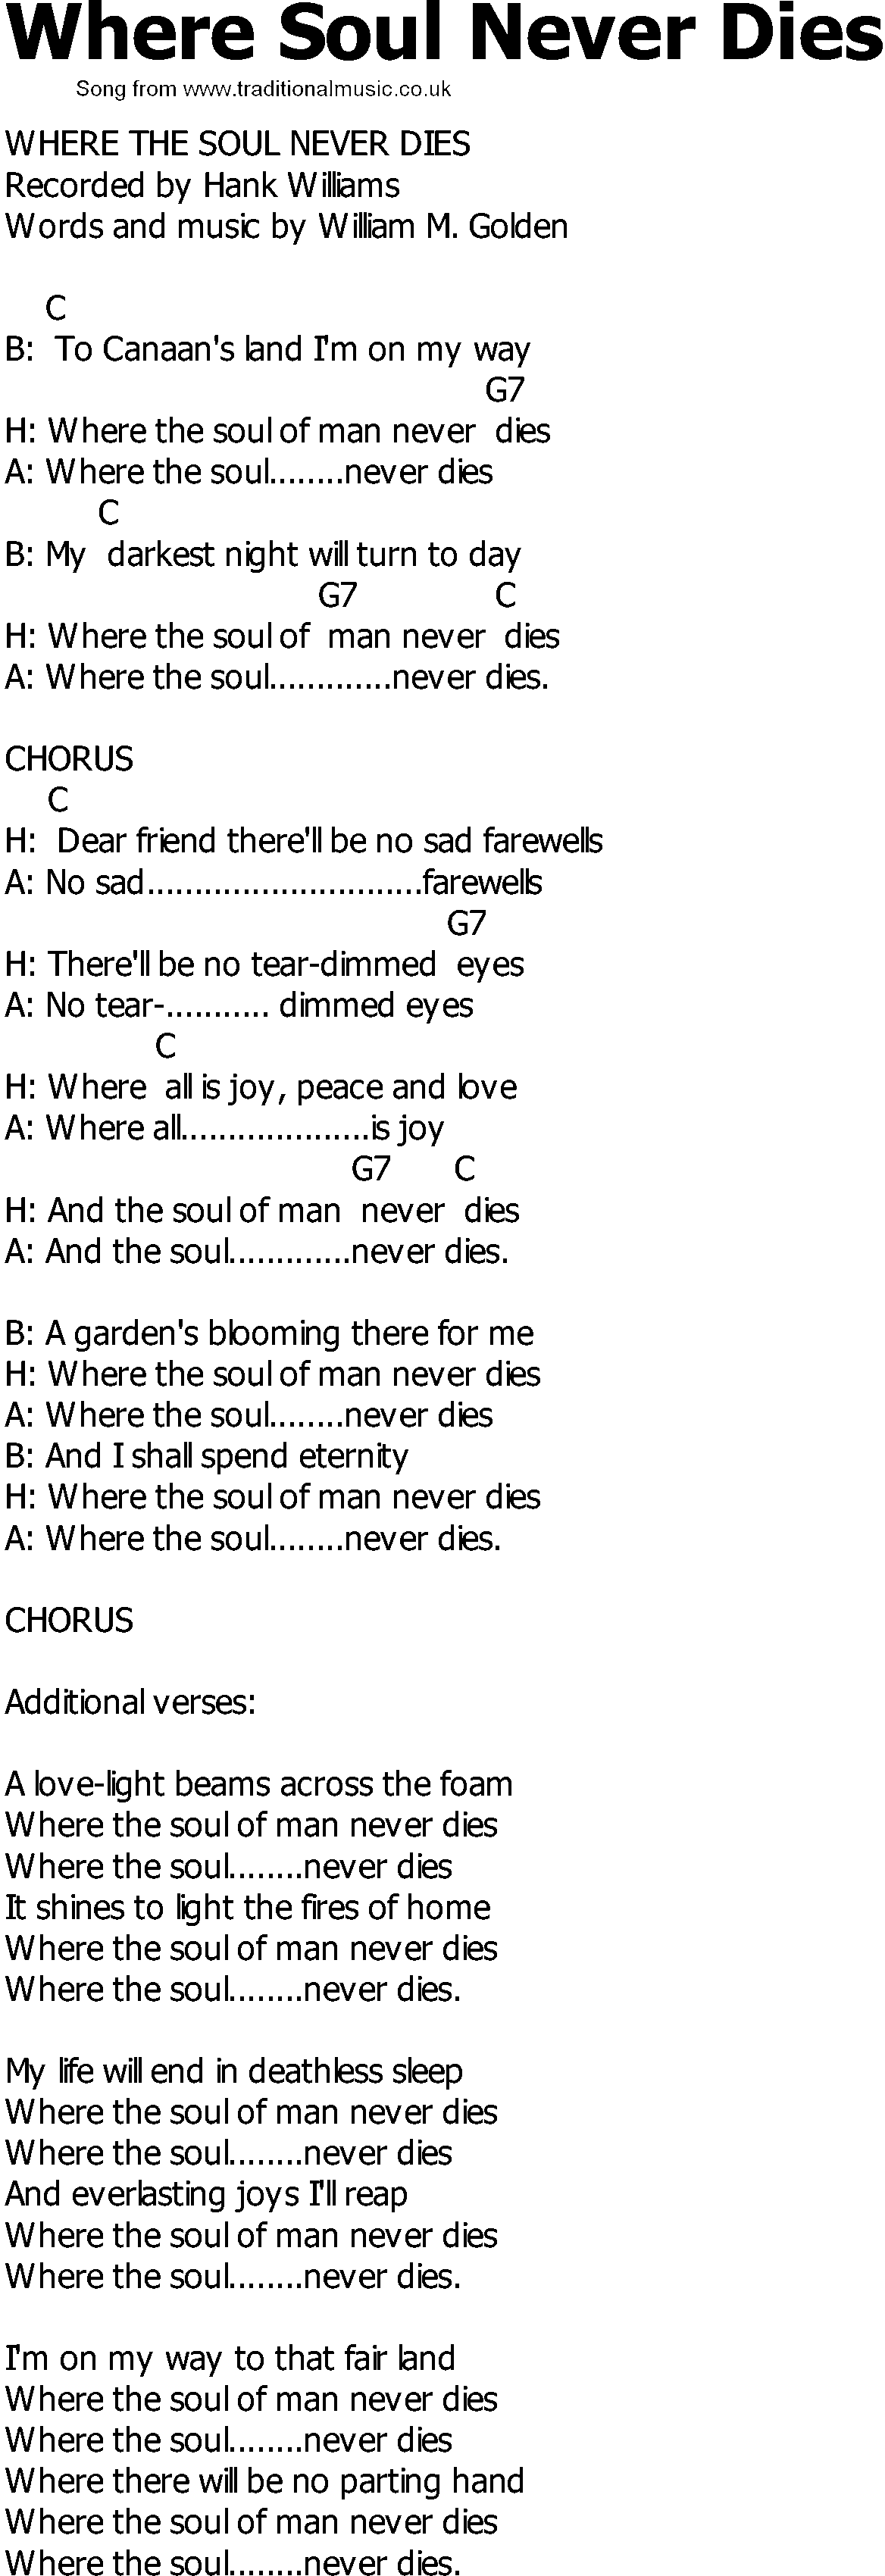 Old Country song lyrics with chords - Where Soul Never Dies